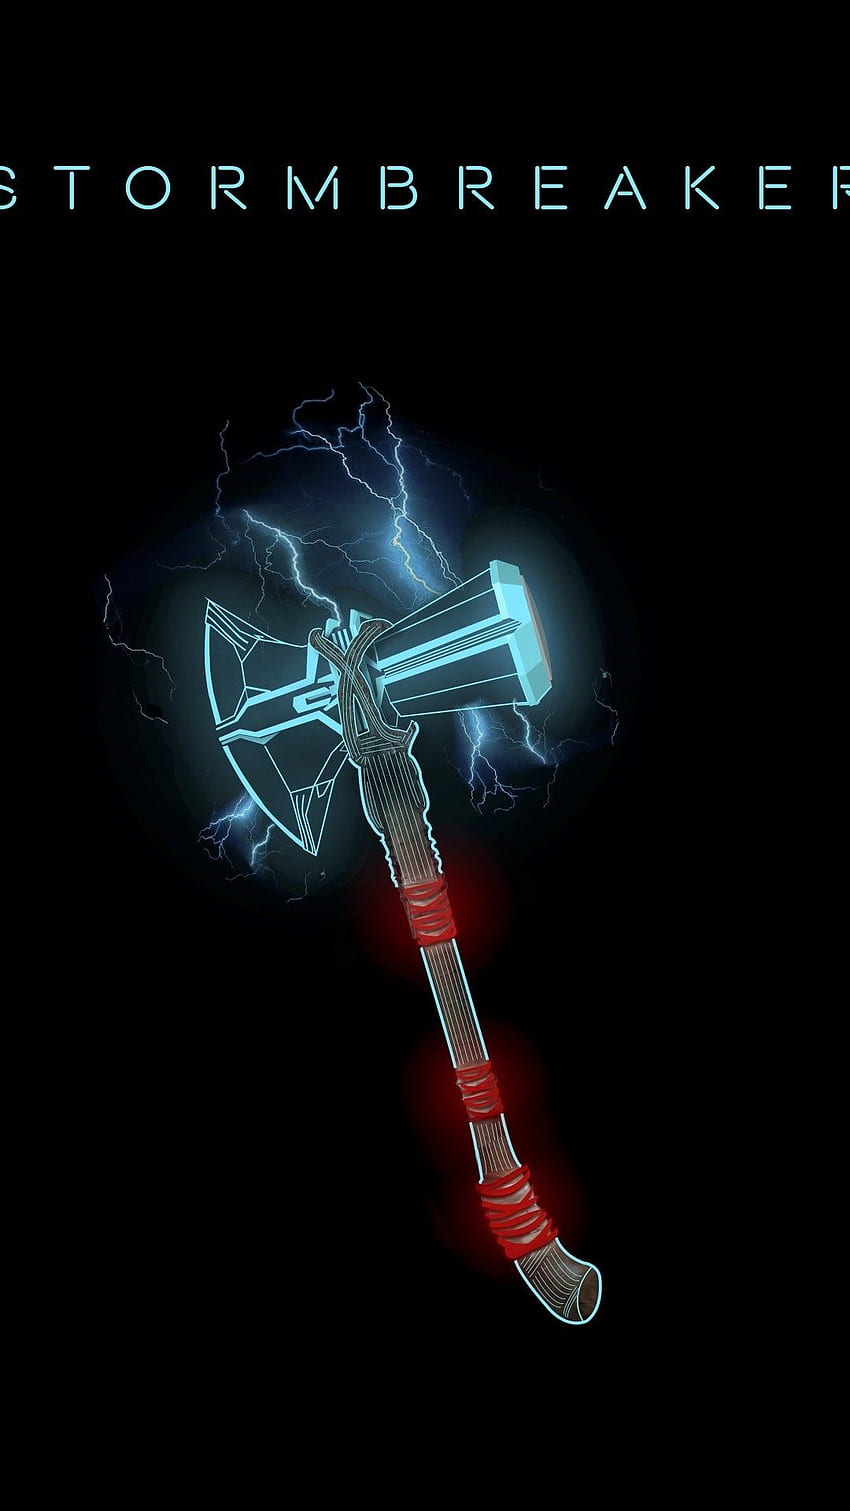 Thor, Hammer, Stormbreaker, Minimalism for iPhone 8, iPhone 7 Plus, iPhone 6+, Sony Xperia Z, HTC One HD phone wallpaper